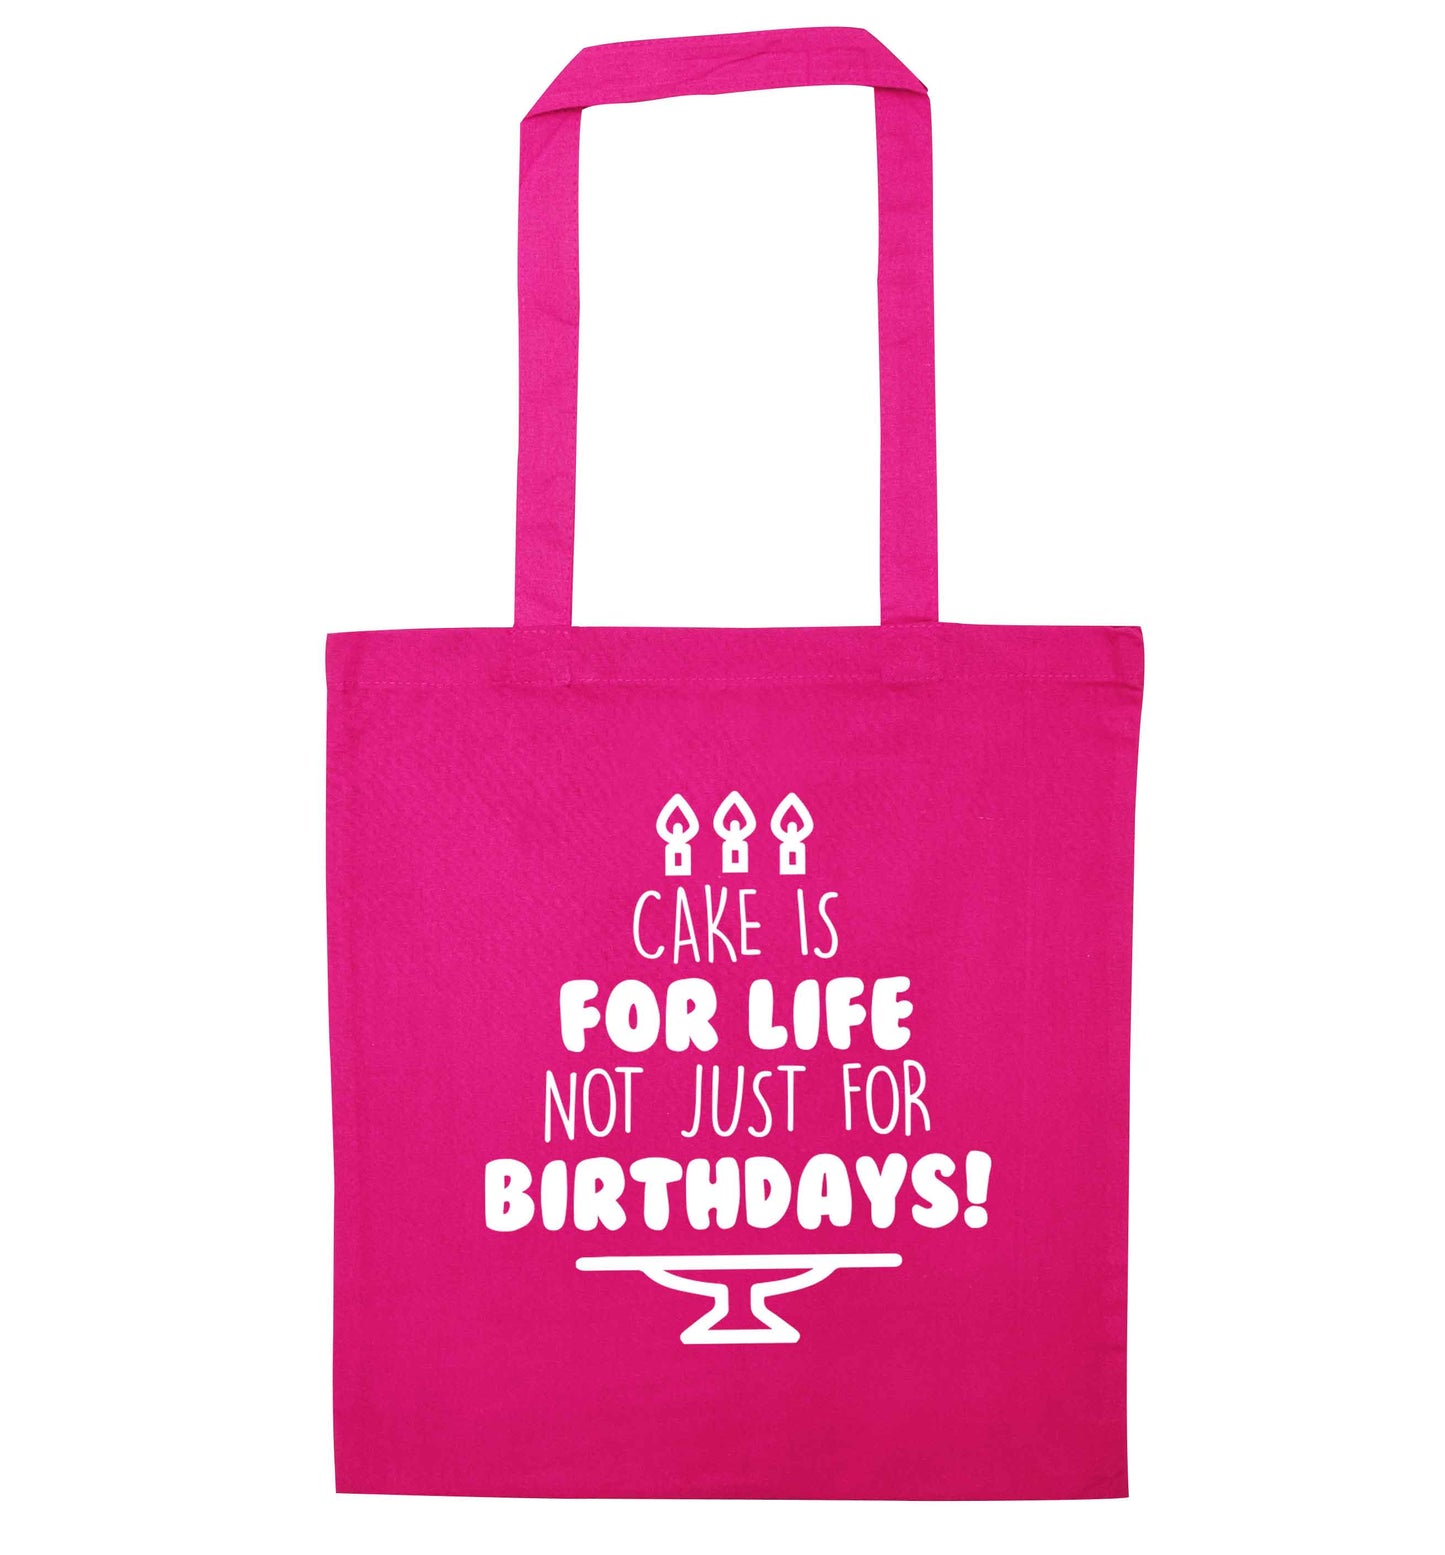 Cake is for life not just for birthdays pink tote bag